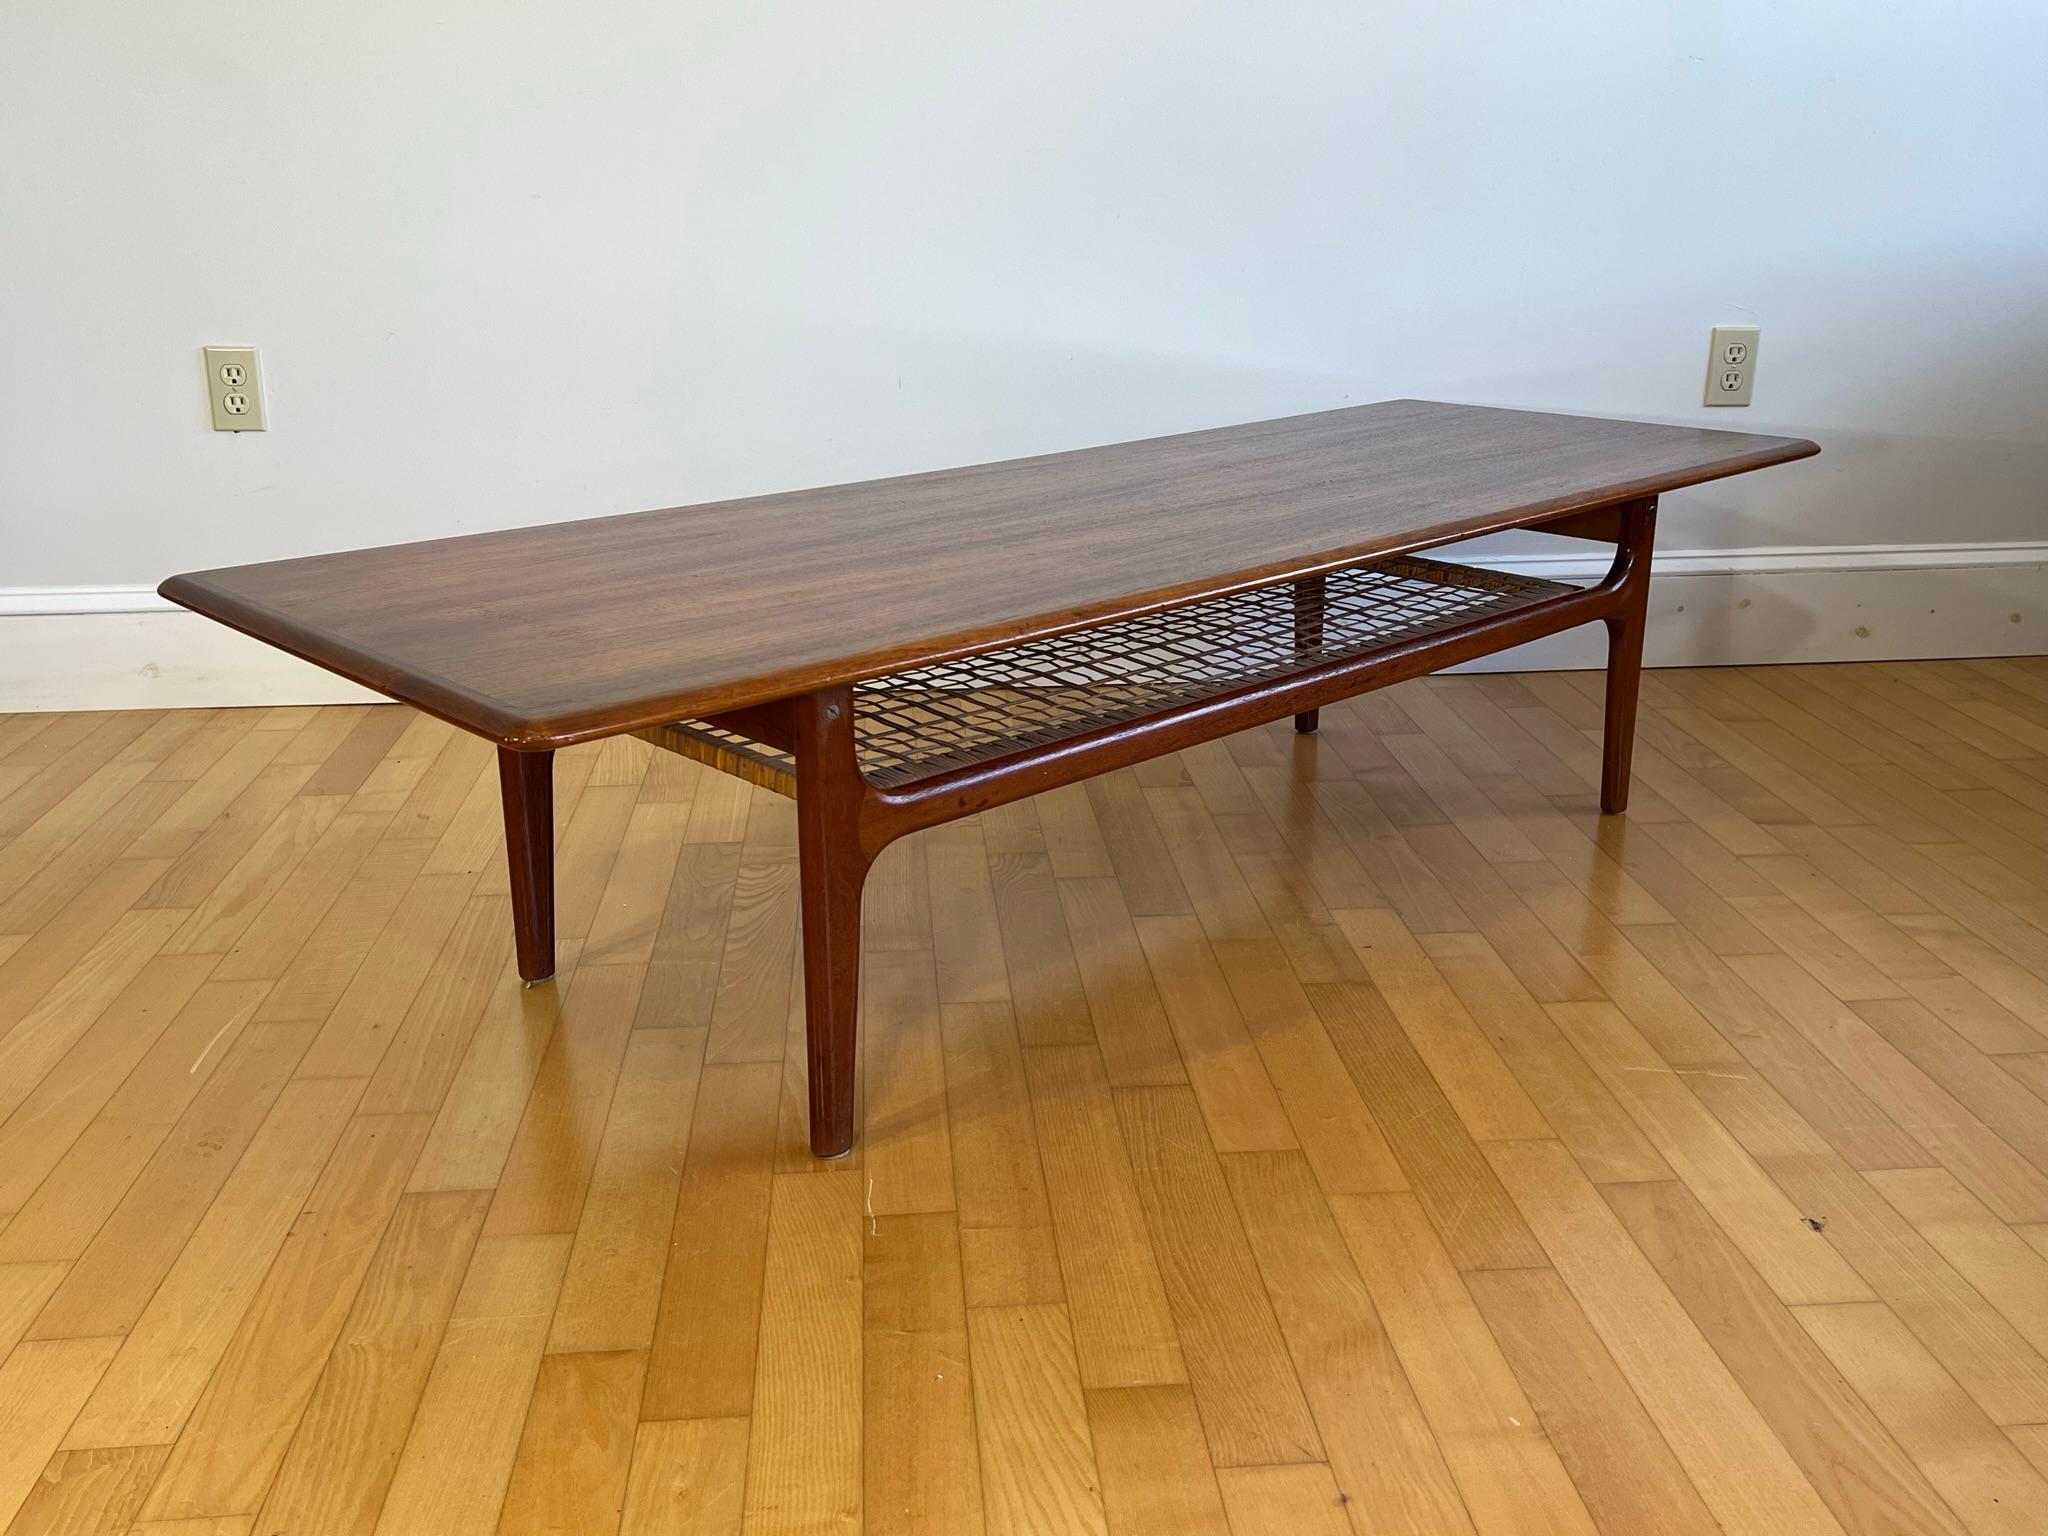 Fabulous vintage coffee table, made by renown danish company Trioh in the 60s. This gorgeous table consists of teak legs and upper plate and woven cane shelf.  It comes in a natural teak danish oil finish and timeless minimalist design. 